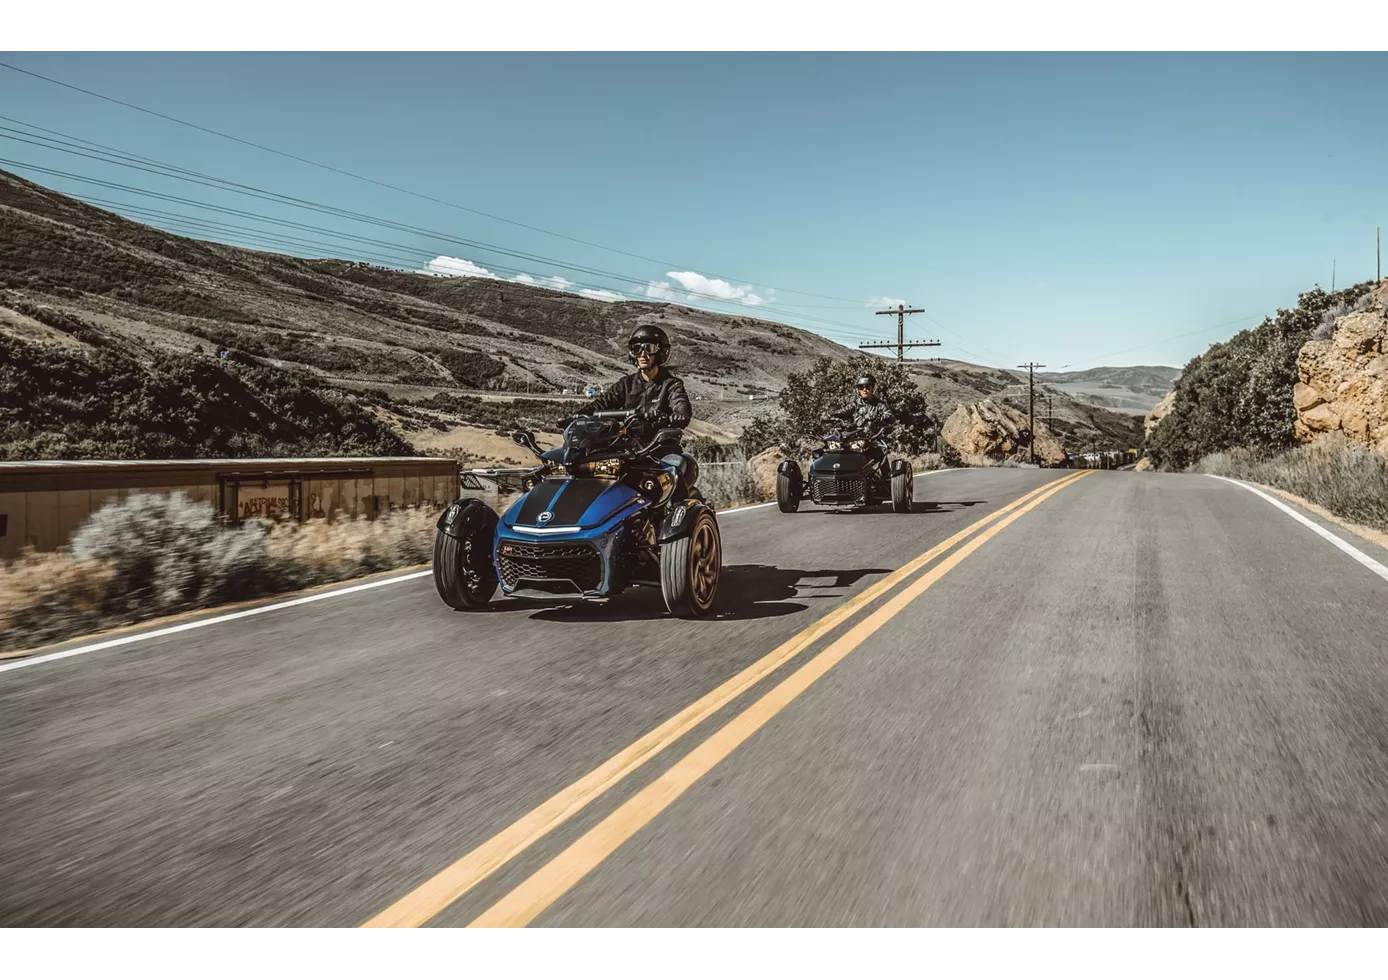 Can-Am Spyder F3-S 2019